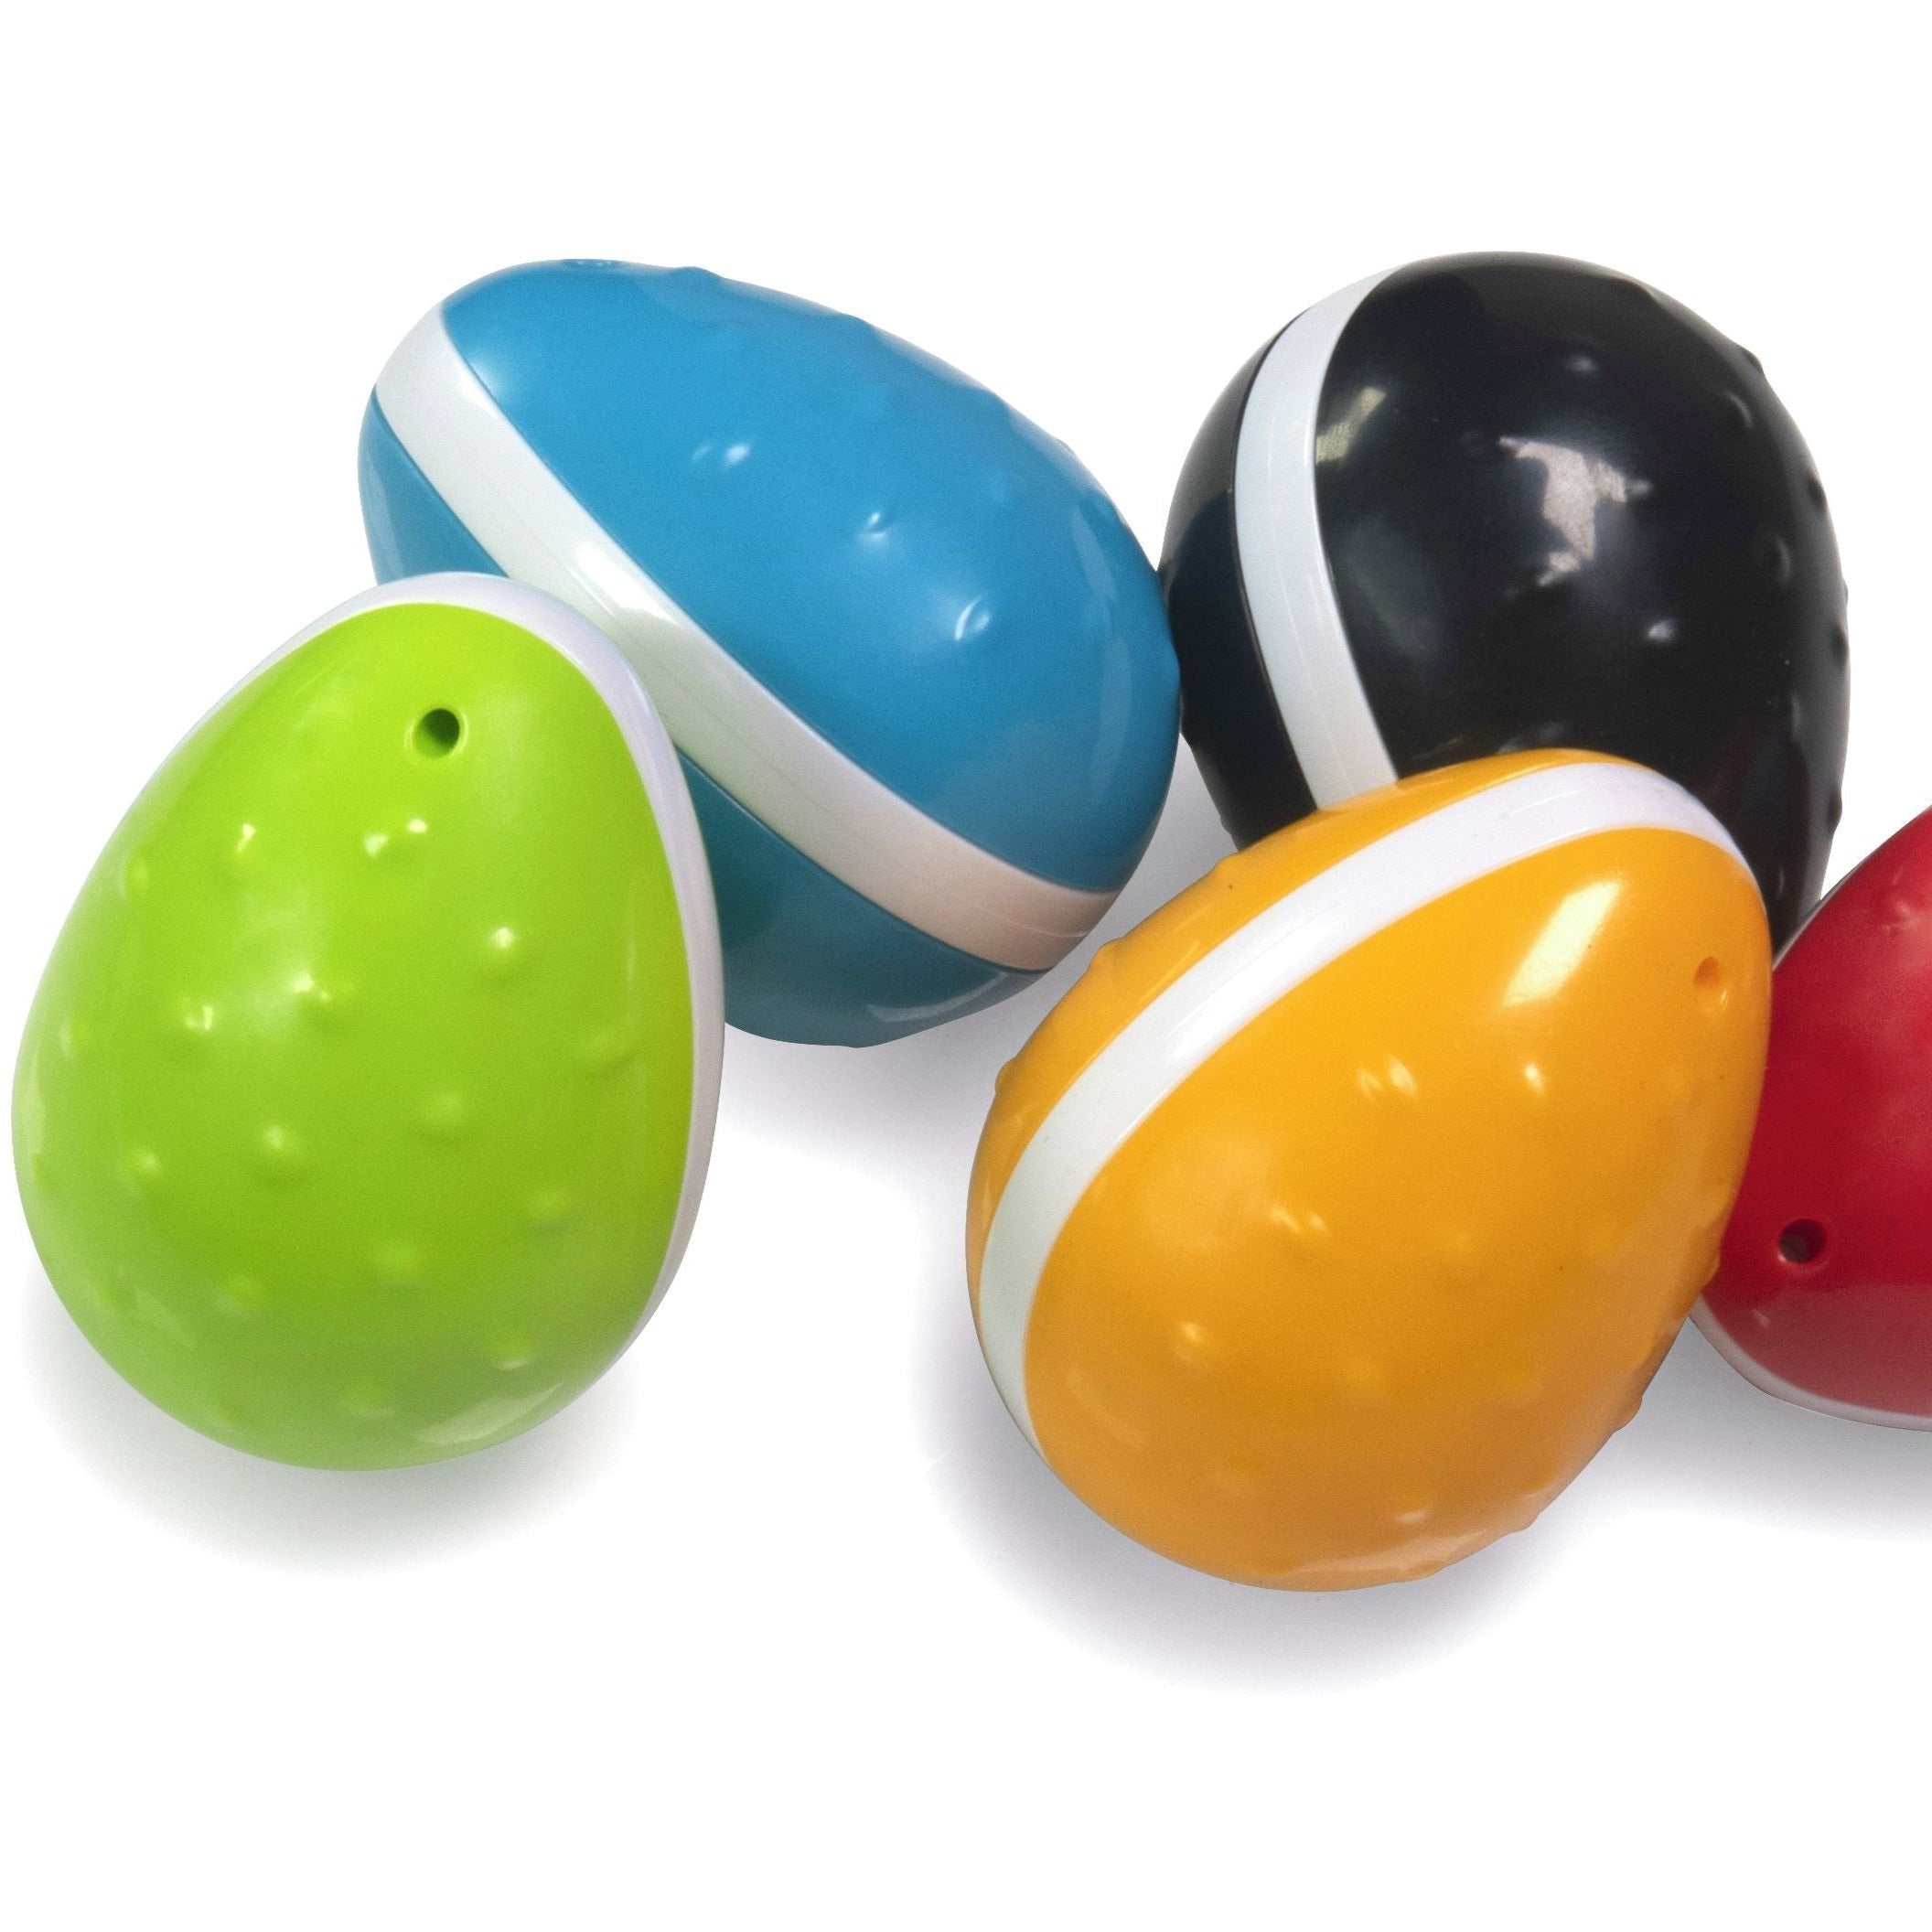 Halilit Egg Shaker Solid Colours (Various Colours), The Halilit Egg Shaker Solid Colours are an absolute delight for little ones. These adorable swishy shakers are designed to captivate their senses and introduce them to the magical world of music-making.Made from high-quality materials, you can be assured that these egg shakers are durable, ensuring they can withstand even the most enthusiastic little hands. The solid colours are bright and attractive, making them visually appealing for children.But it's n